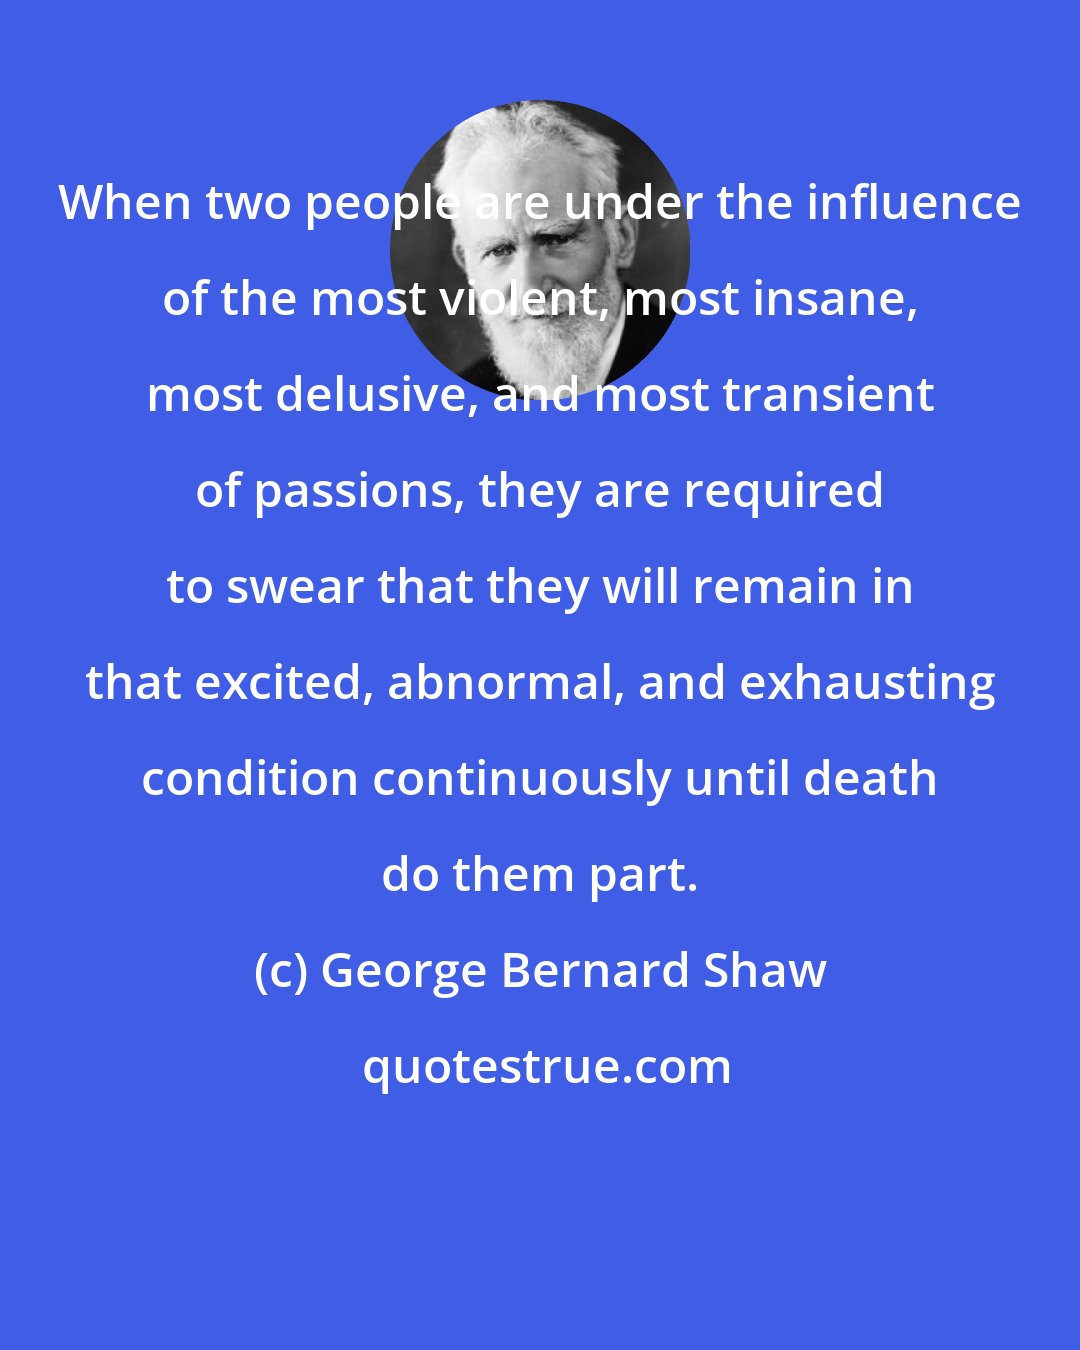 George Bernard Shaw: When two people are under the influence of the most violent, most insane, most delusive, and most transient of passions, they are required to swear that they will remain in that excited, abnormal, and exhausting condition continuously until death do them part.